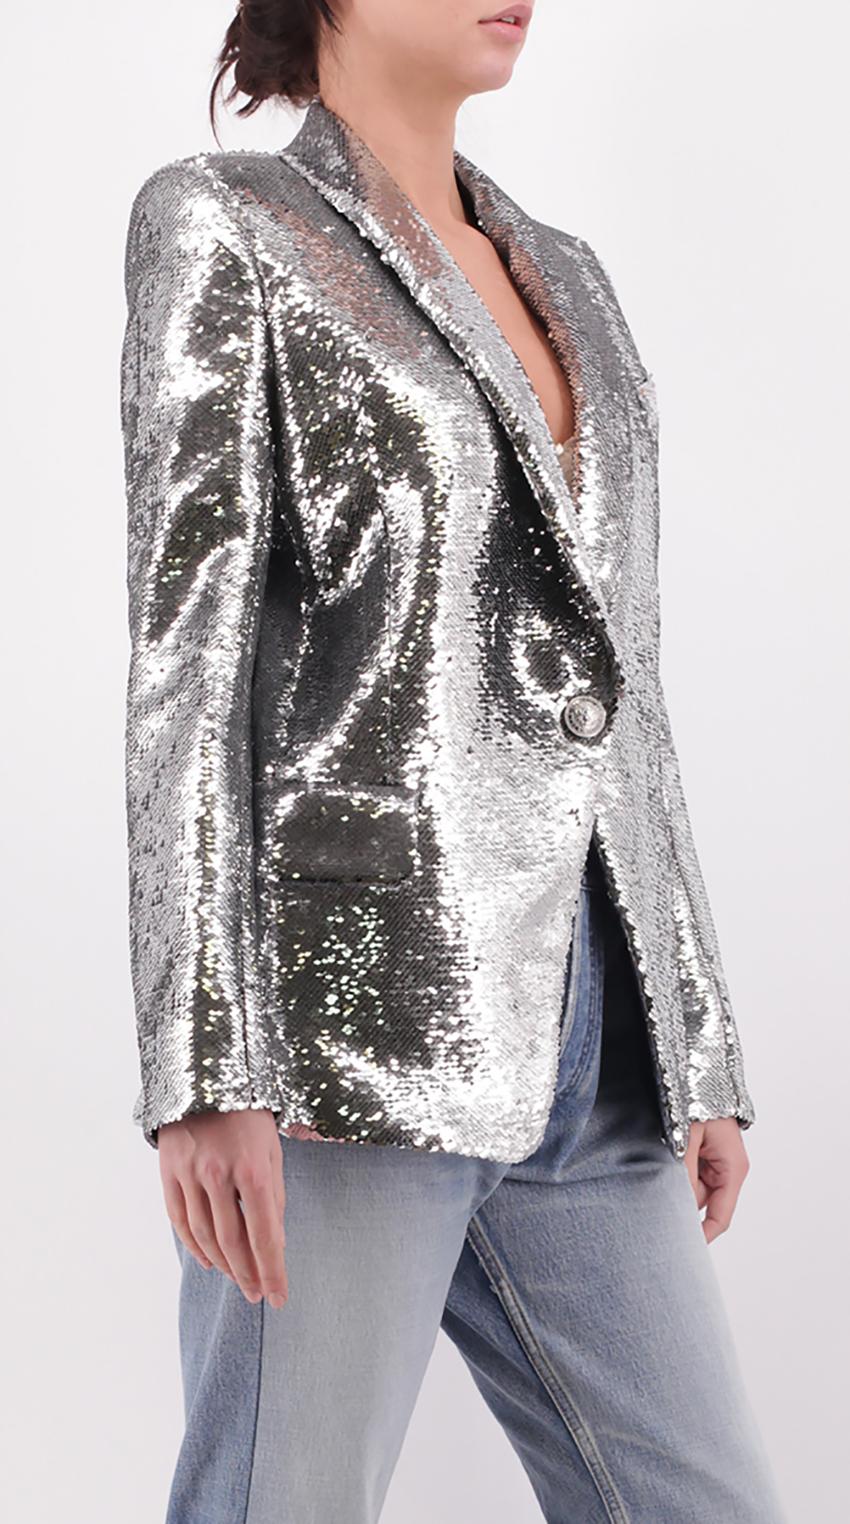 BALMAIN

Cocktail Evening Silver Sequins Jacket

V- neck

Long sleeves

 
Content: Sequins


Size FR 36 - US 4
Size FR 38 - US 6
Size FR 40 - US 8


Made in France

Brand new!

 100% authentic guarantee 

       PLEASE VISIT OUR STORE FOR MORE GREAT